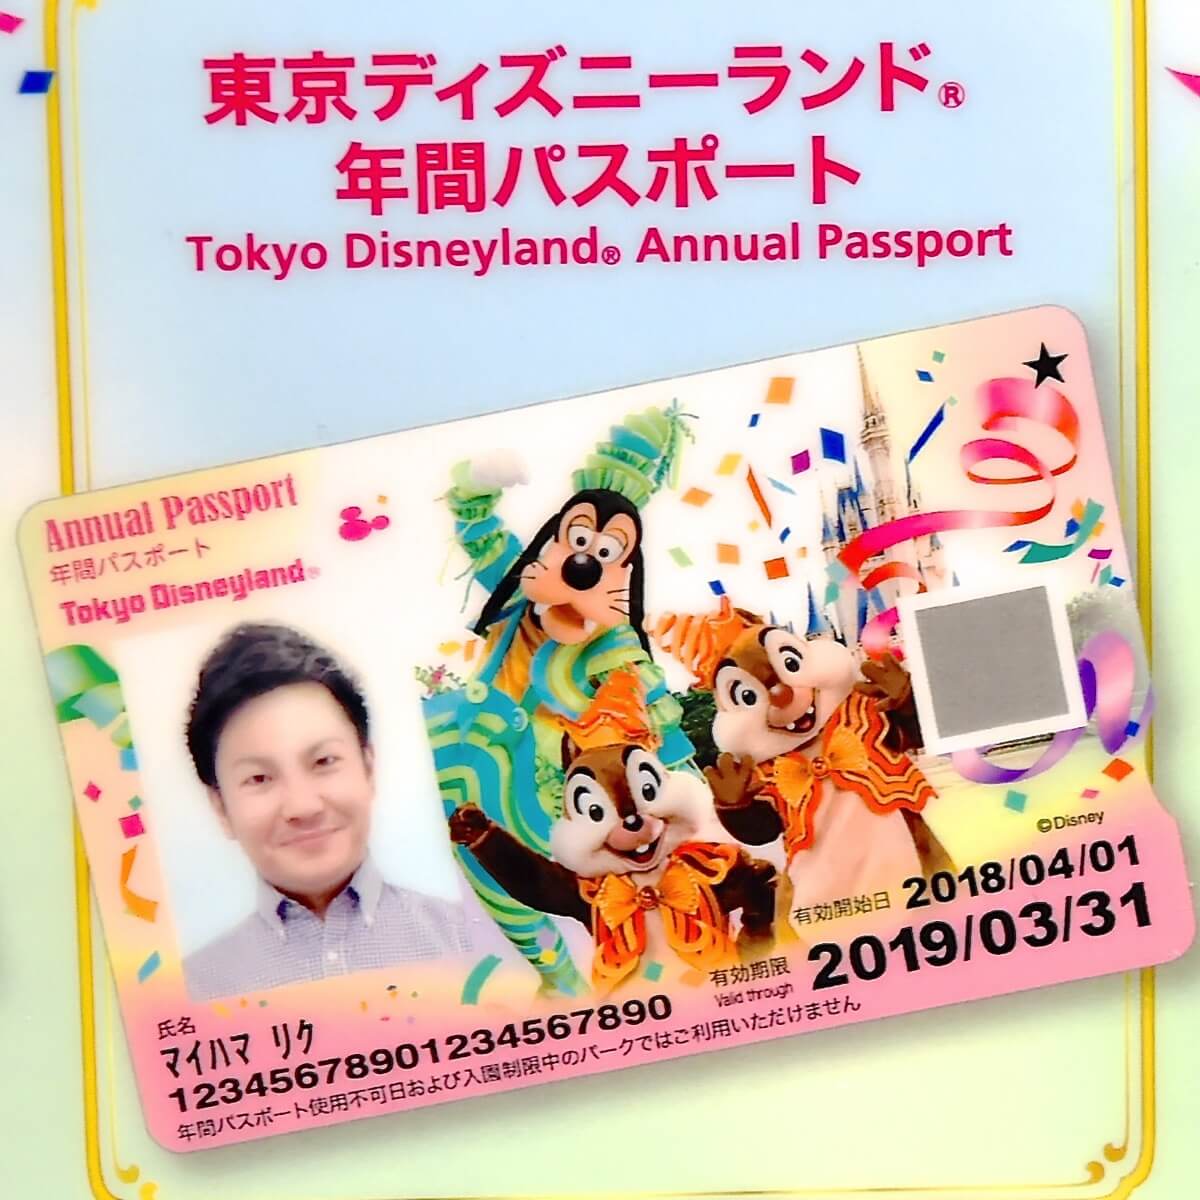 Happiest Celebration デザイン 東京ディズニーリゾート 18 年間パスポート